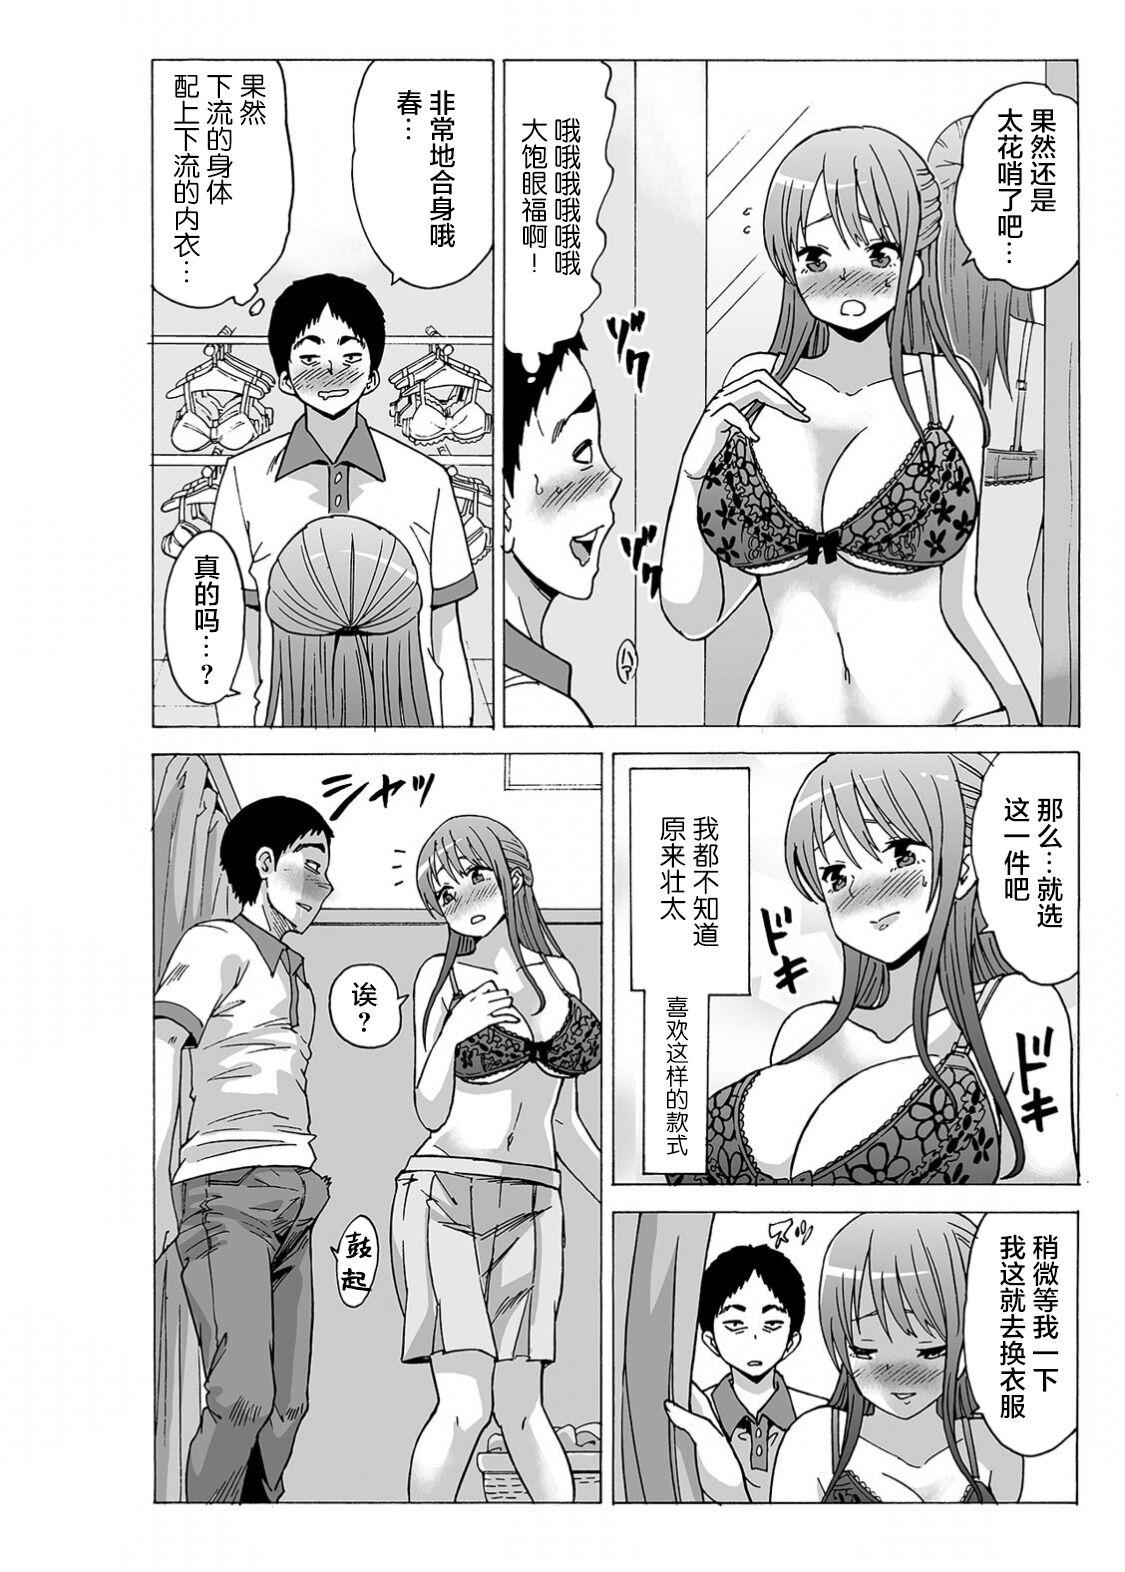 Verga [Motaro / Akahige] My first partner is ... my father-in-law!? 2 [Chinese] Cumming - Page 2